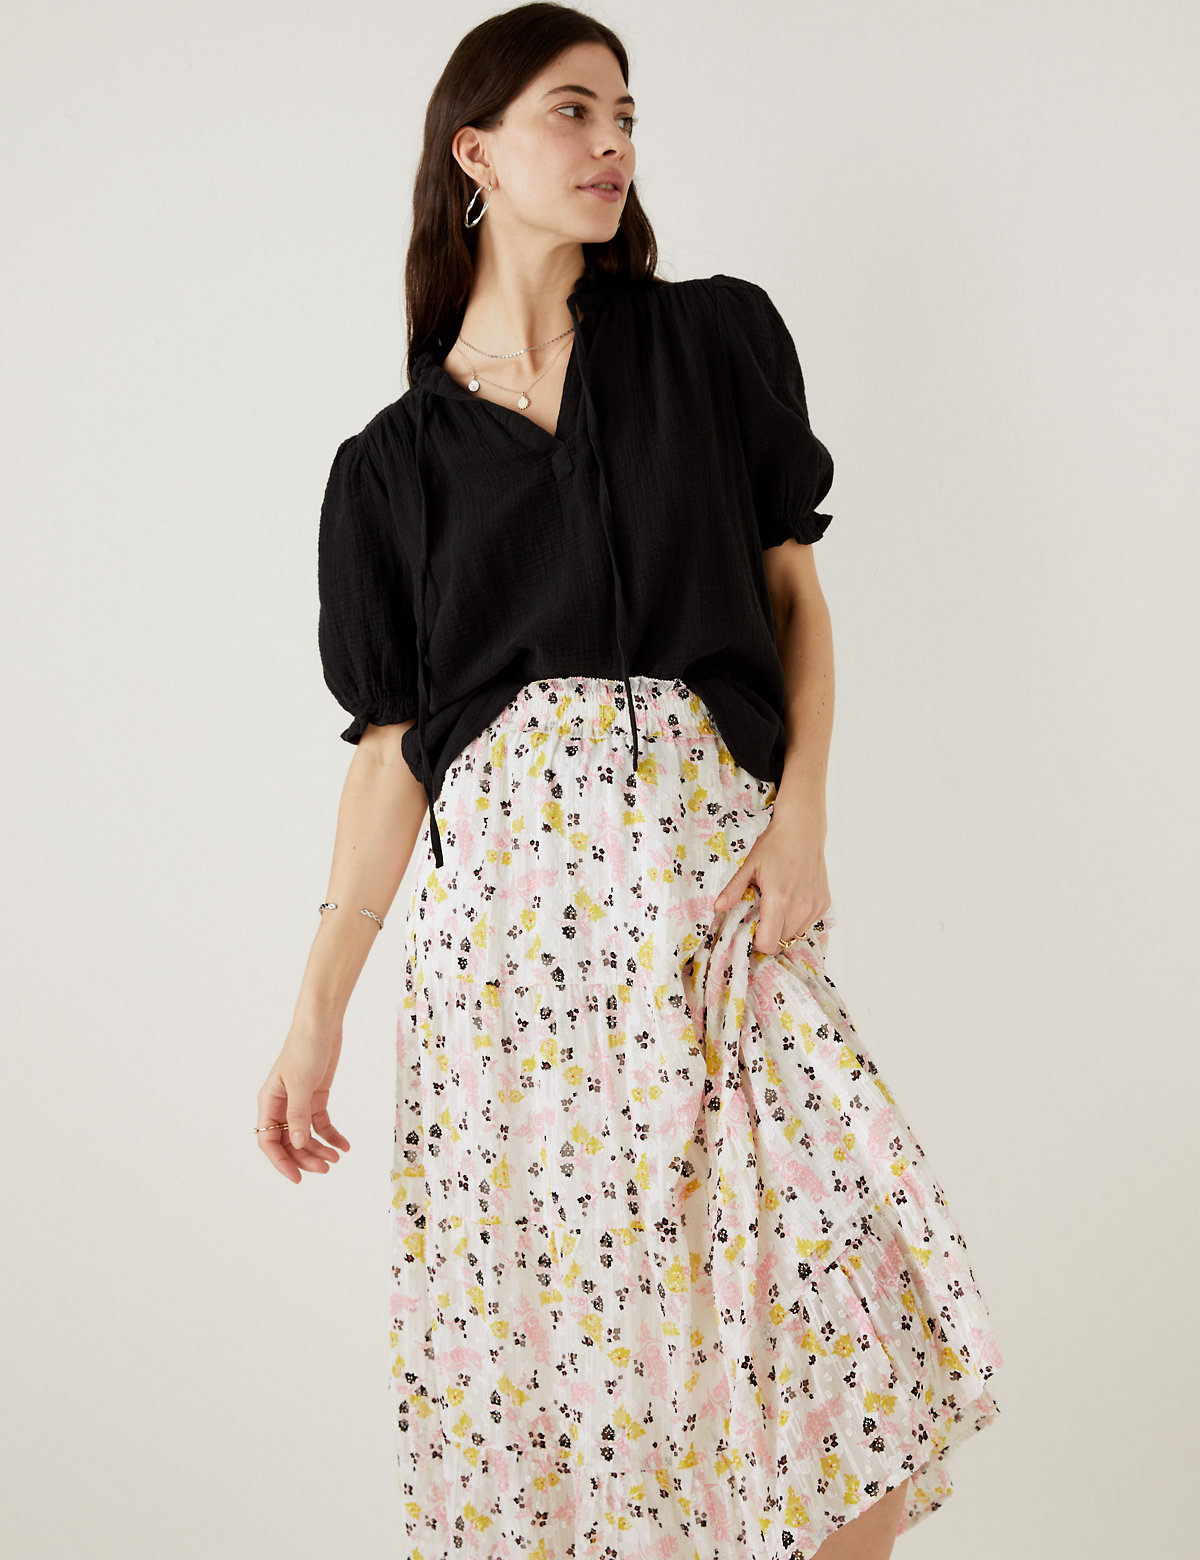 Sparkly Floral Maxi Tiered Skirt